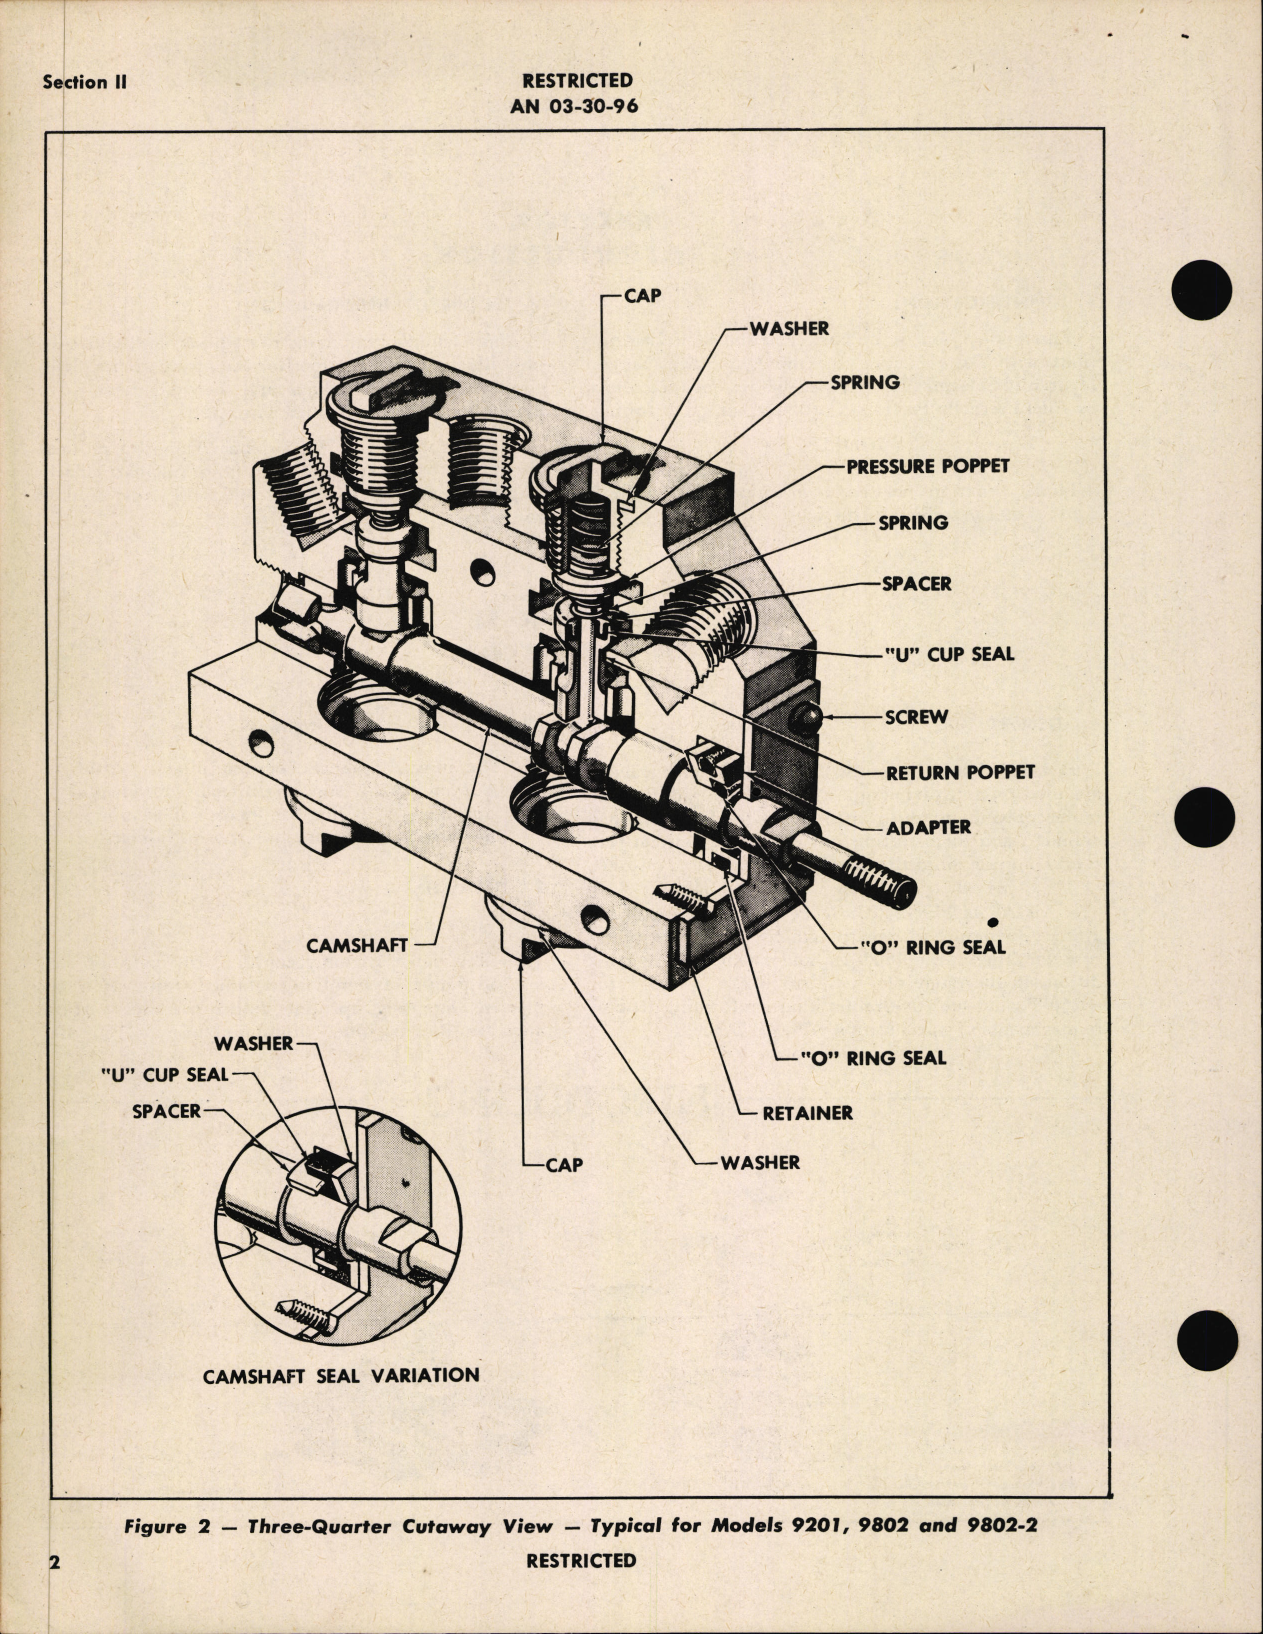 Sample page 6 from AirCorps Library document: Handbook of Instructions with Parts Catalog for Dural Seat Single Hydraulic Selector Valves